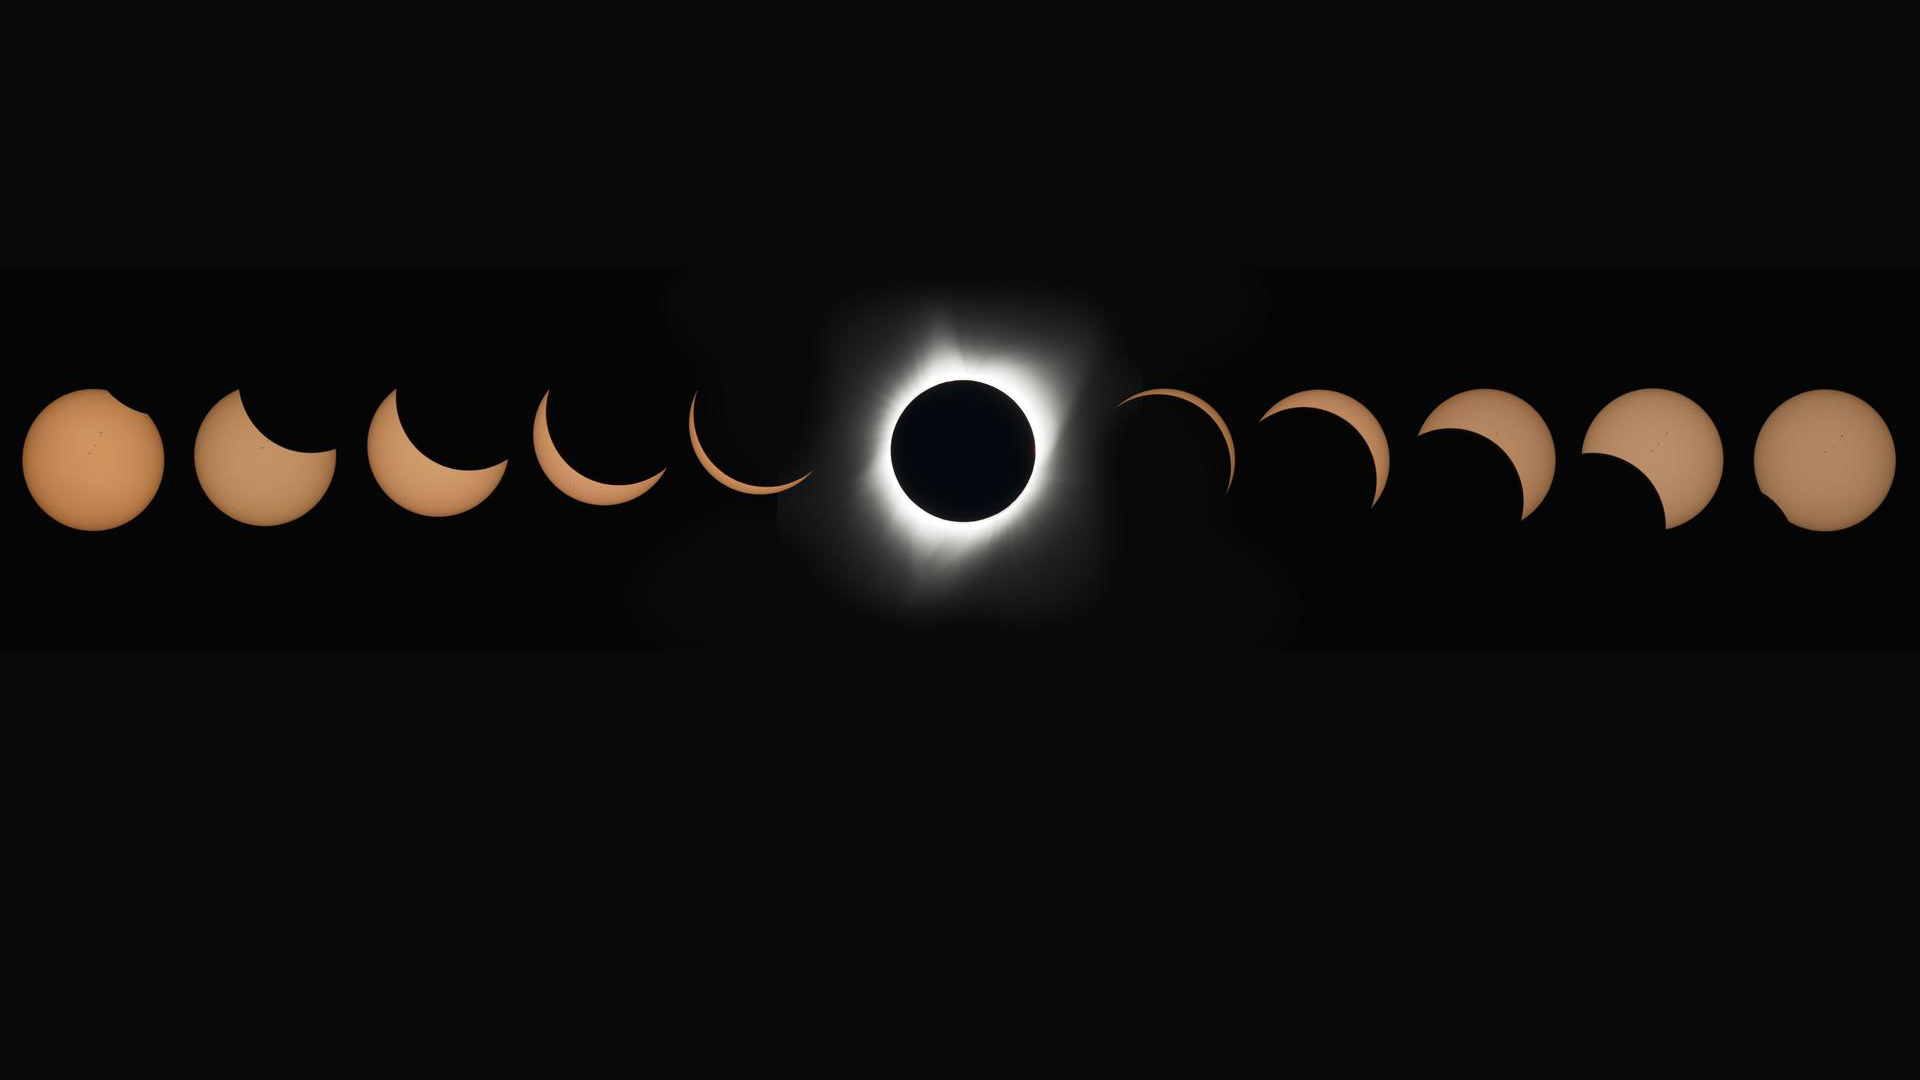 images of an eclipse in various stages